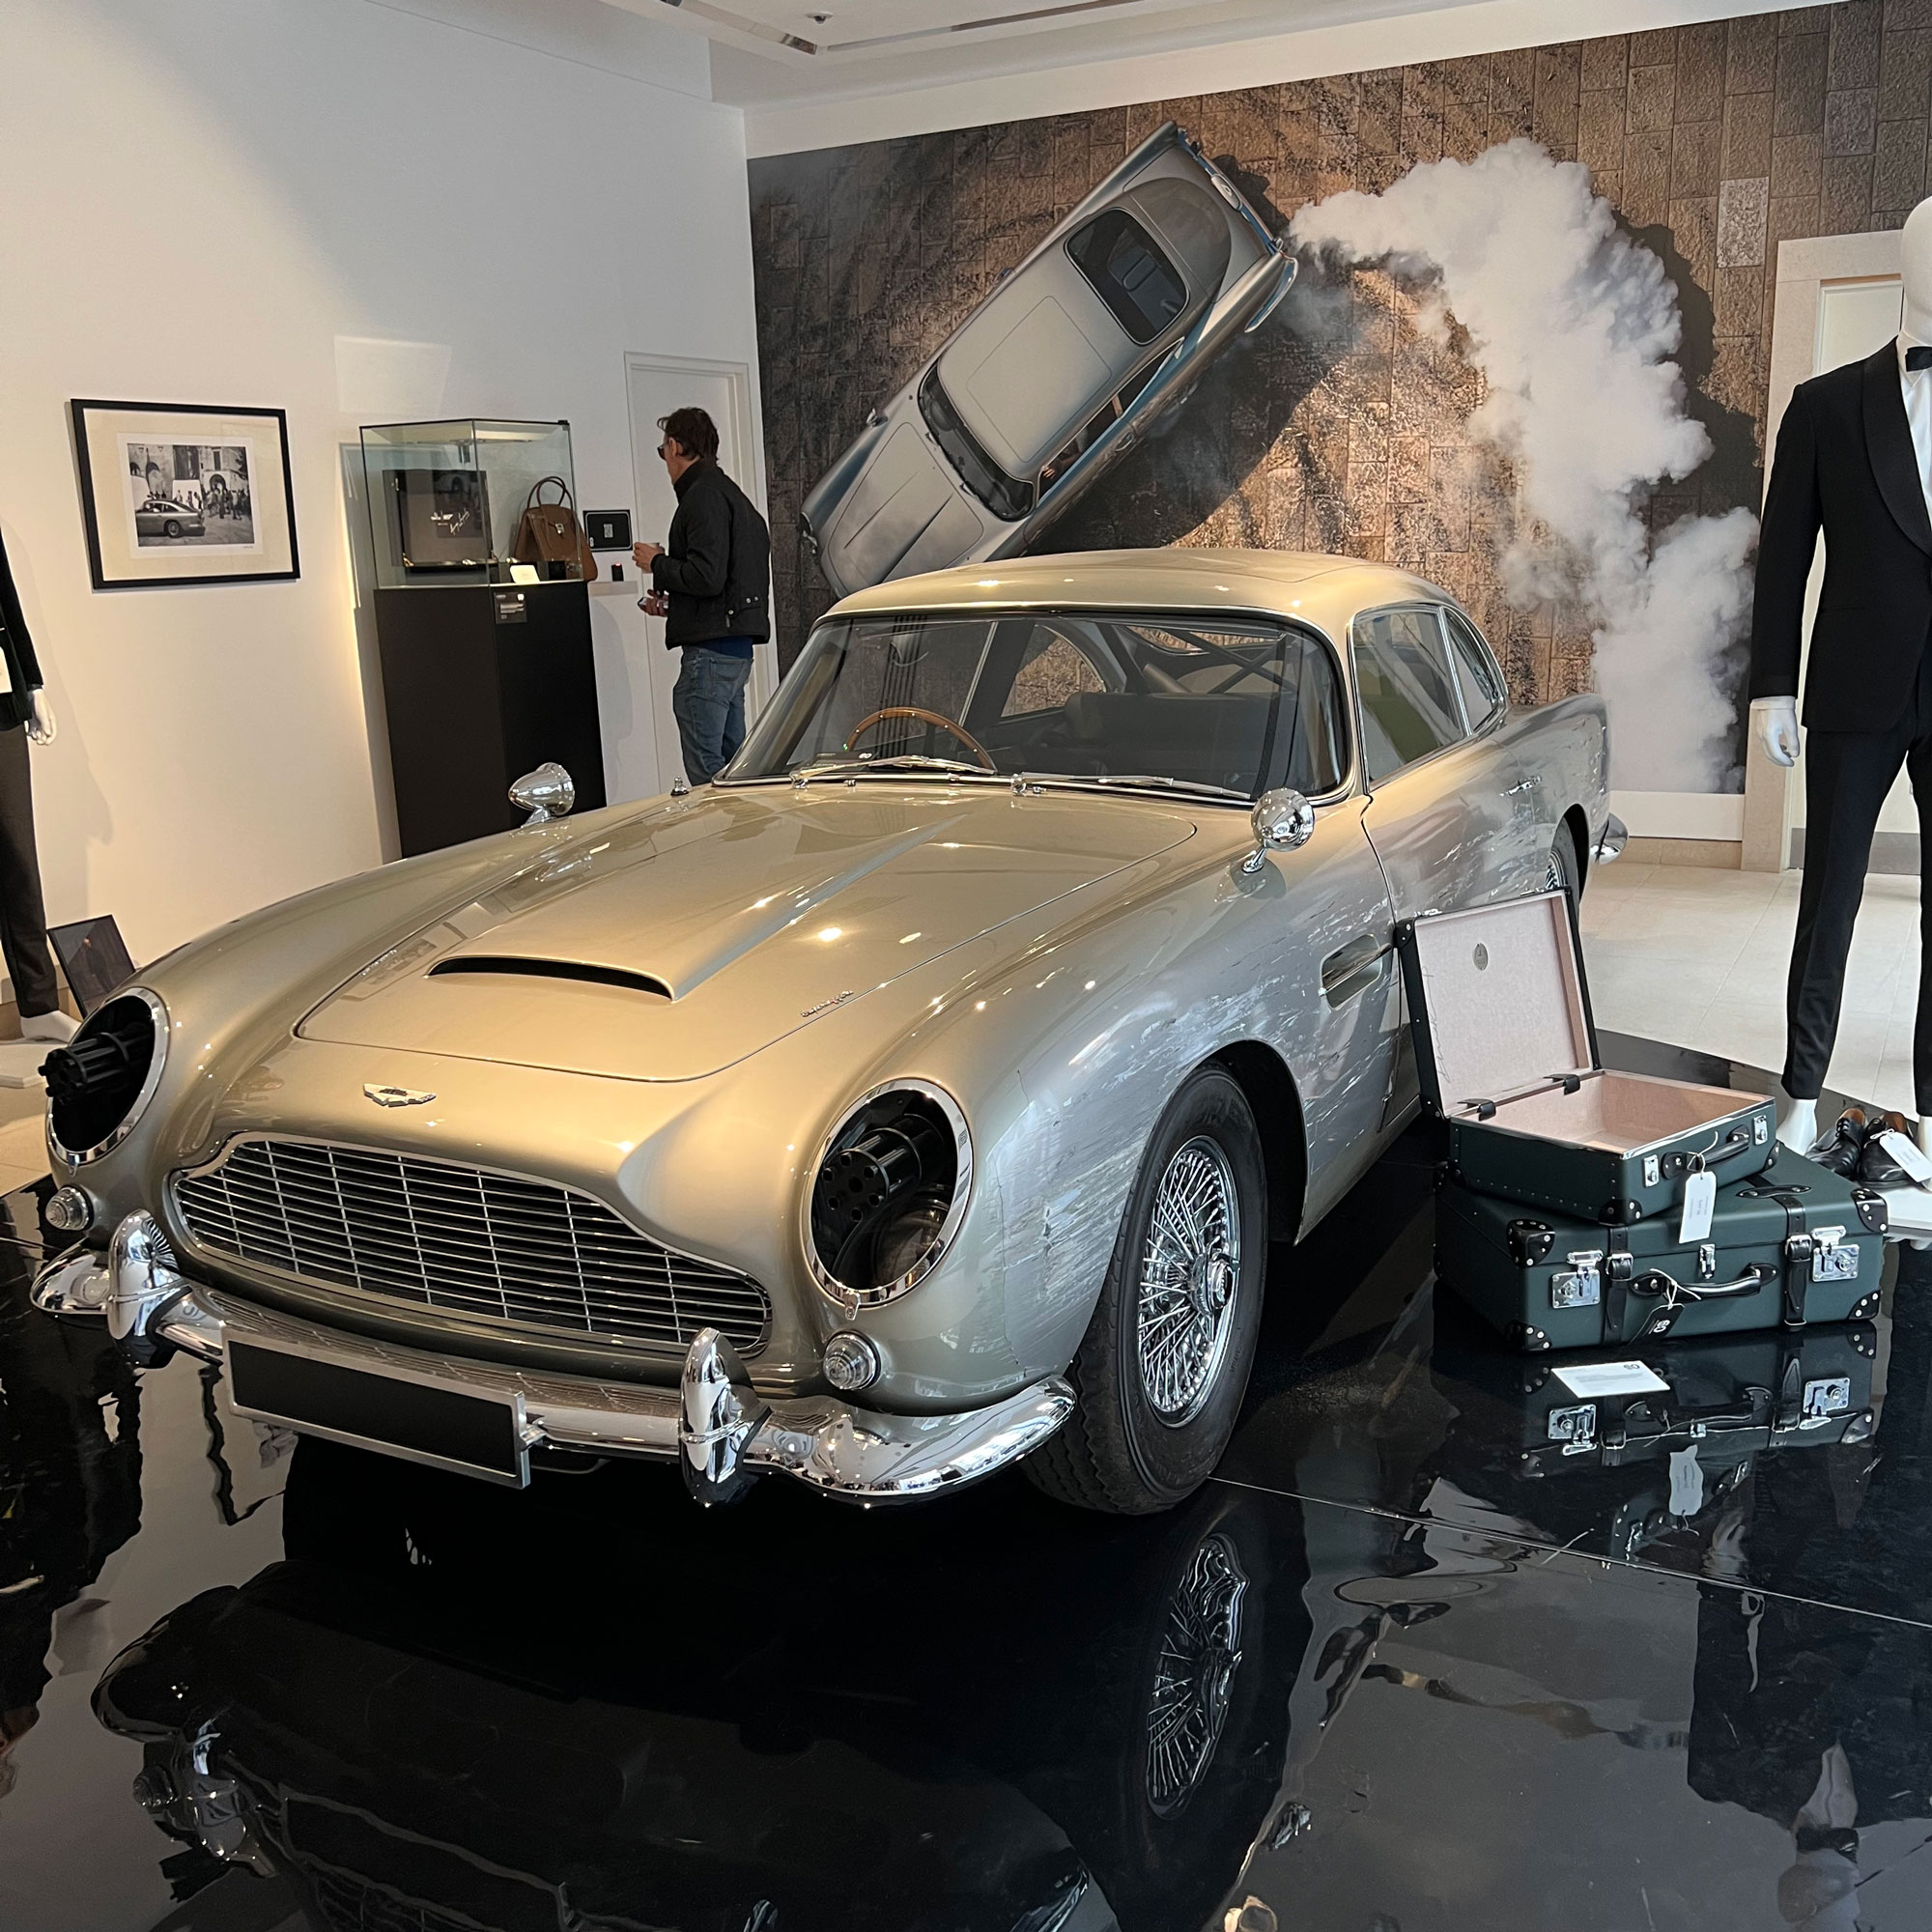 The Aston Martin DB5 from No Time To Die